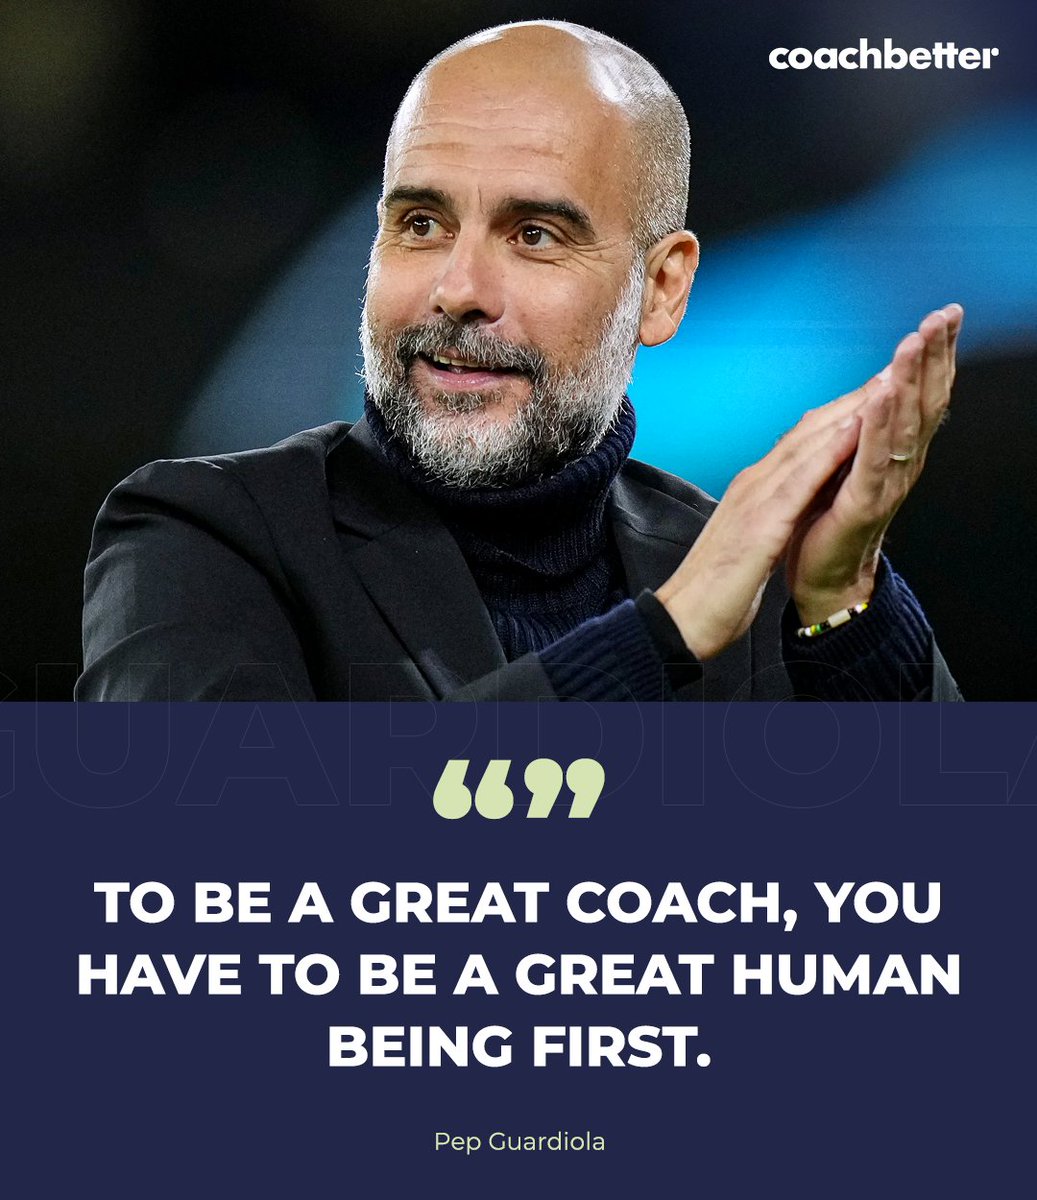 🗣️ “To be a great coach, you have to be a great human being first.” - Pep Guardiola. Agree? 🤔 #coachbetter #pepguardiola